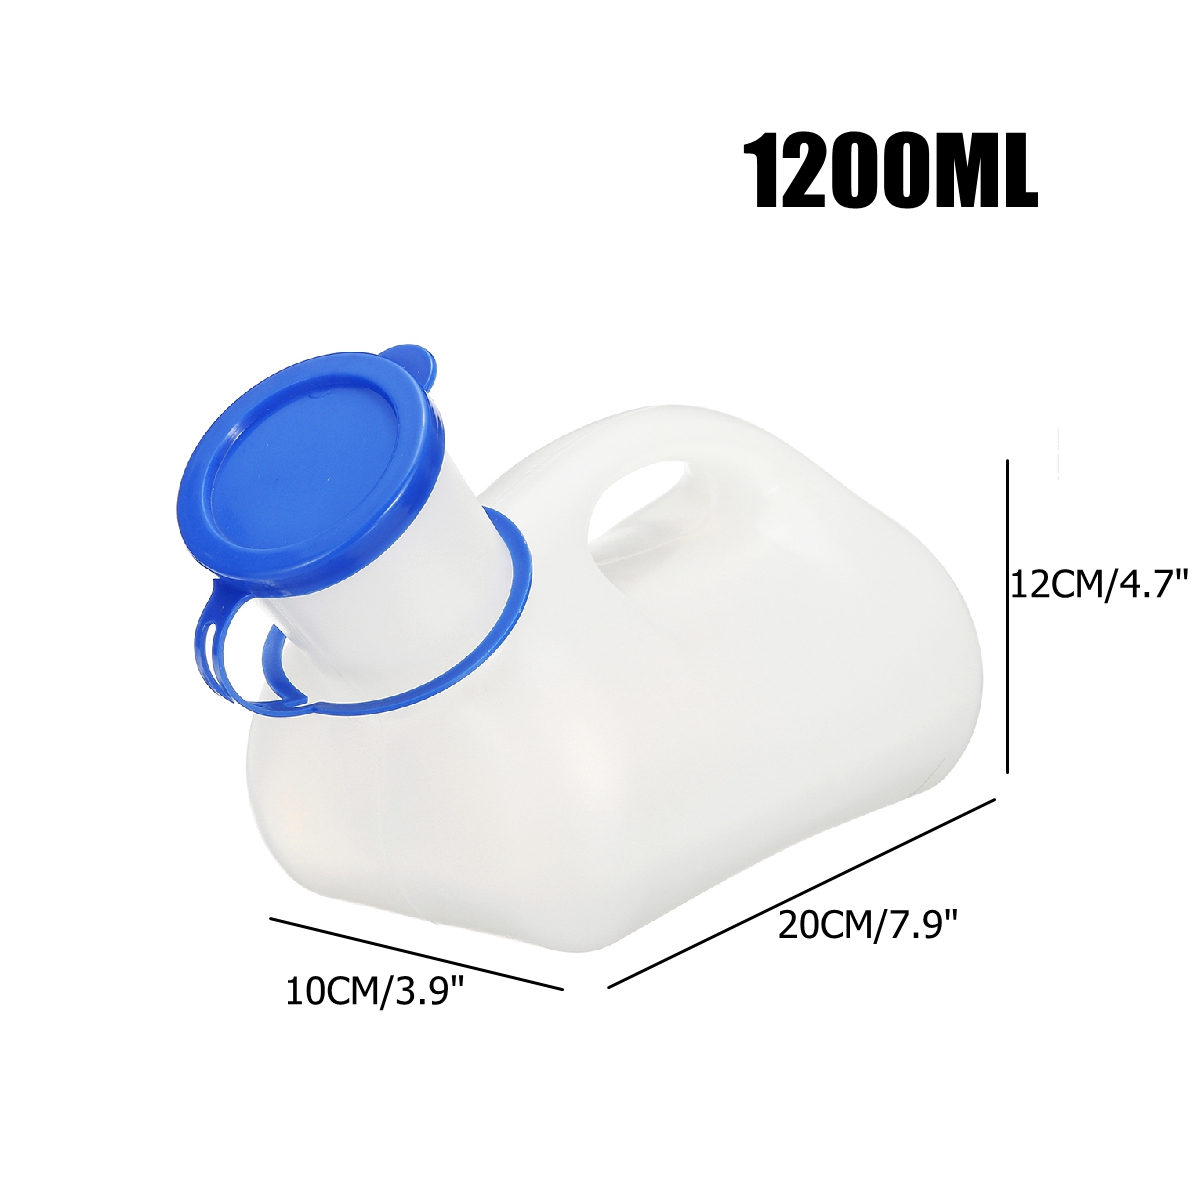 Nowornever Portable Mobile Male Female Urinal Practical Urine Bottle Mobile Toilet Car Journey Travel Camping Handle Urine Bottle with Lid Urination Pot - image 2 of 10